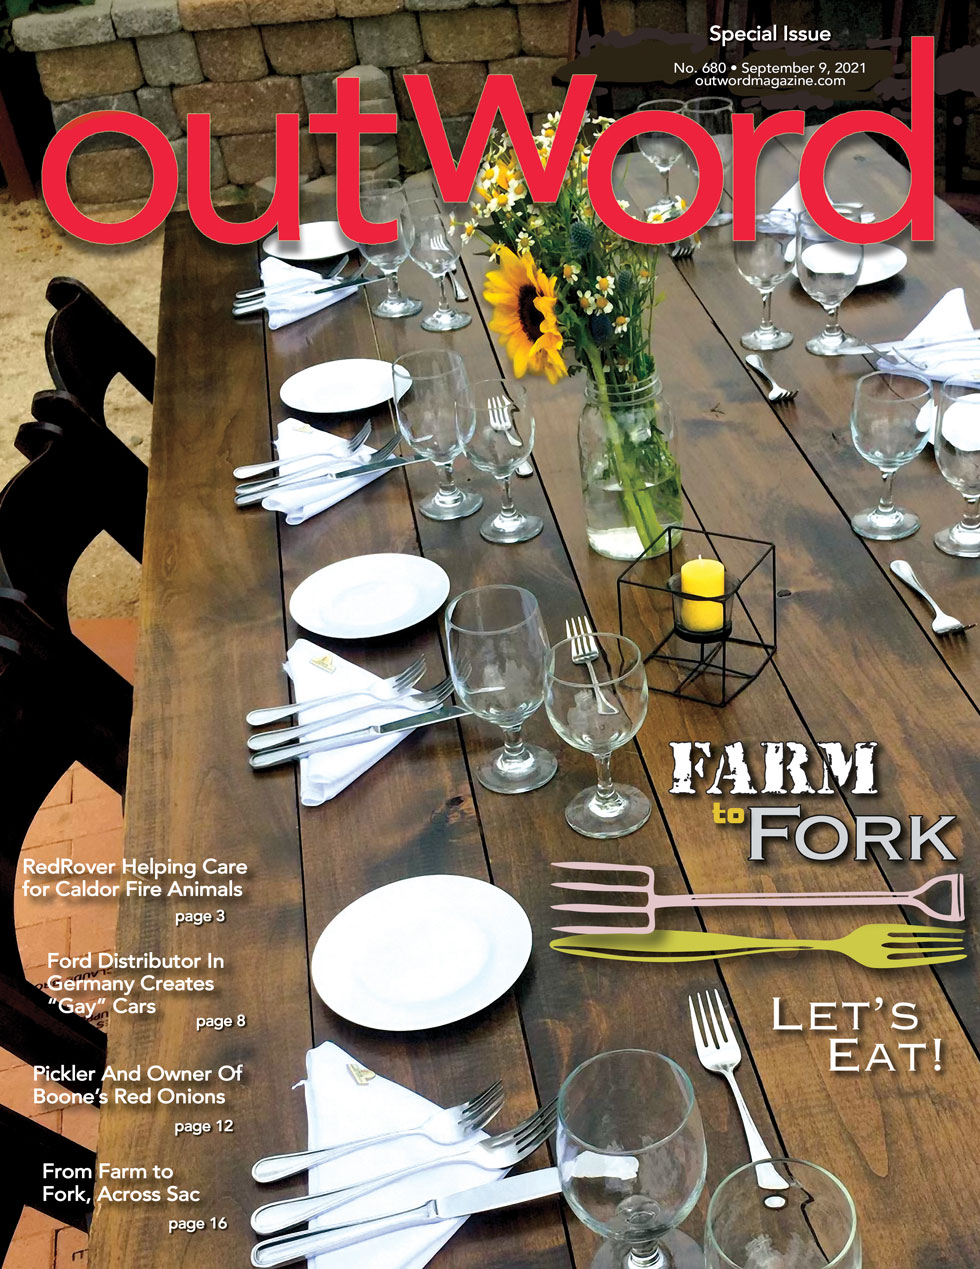 September 9, 2021 | Our Annual Farm to Fork Issue is Out